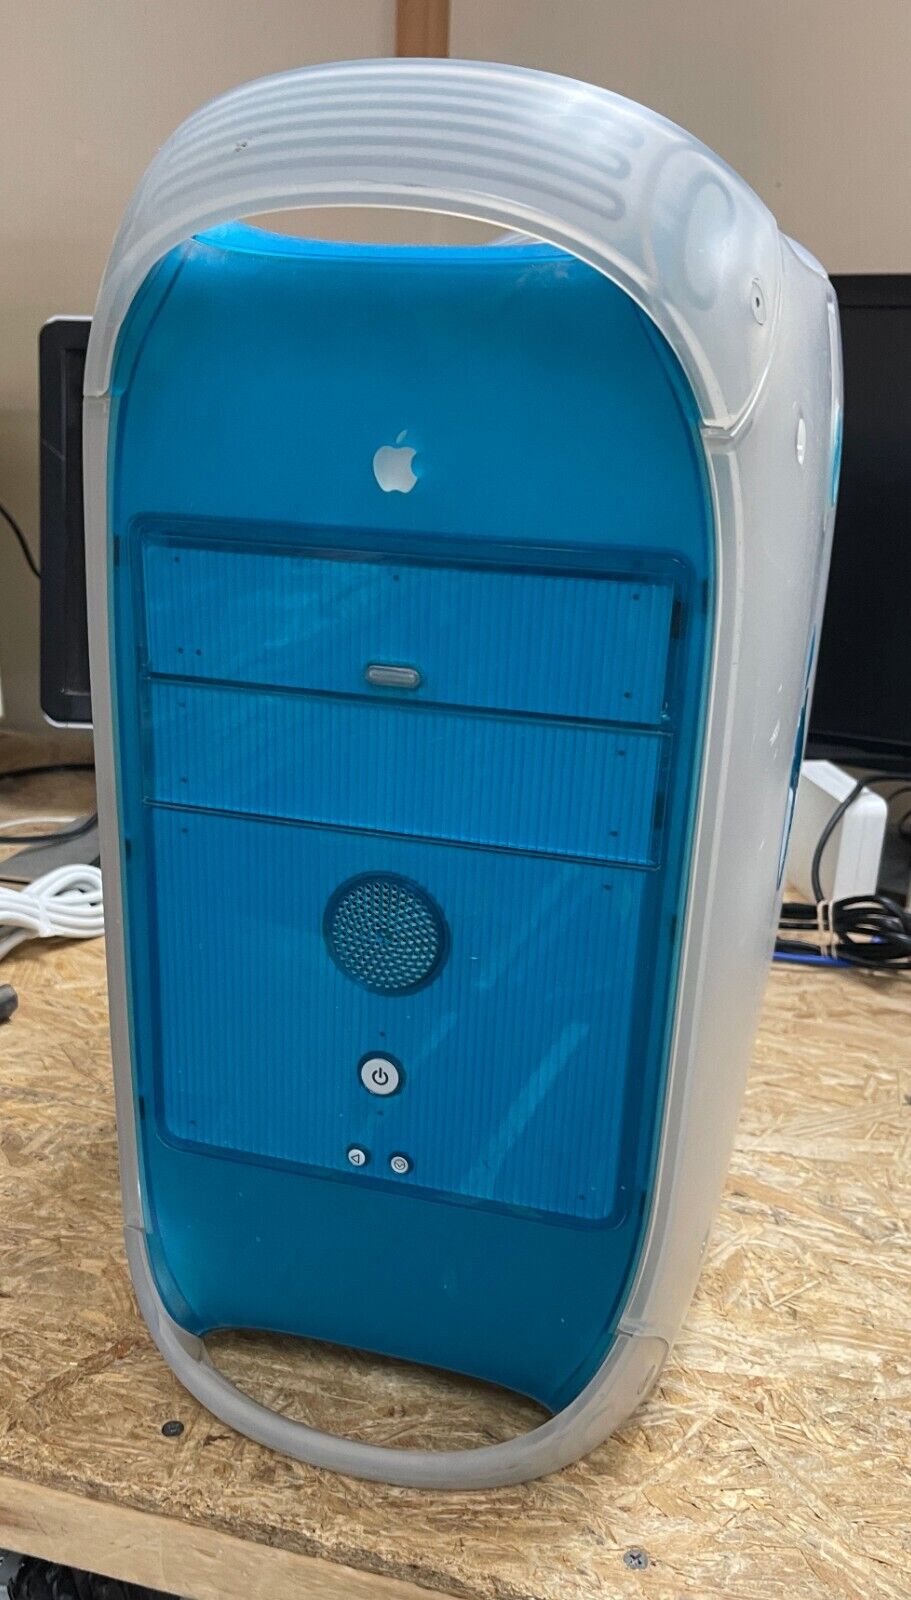 Apple Power Macintosh Blue and White February 1999 300MHz (M6670LL/A)